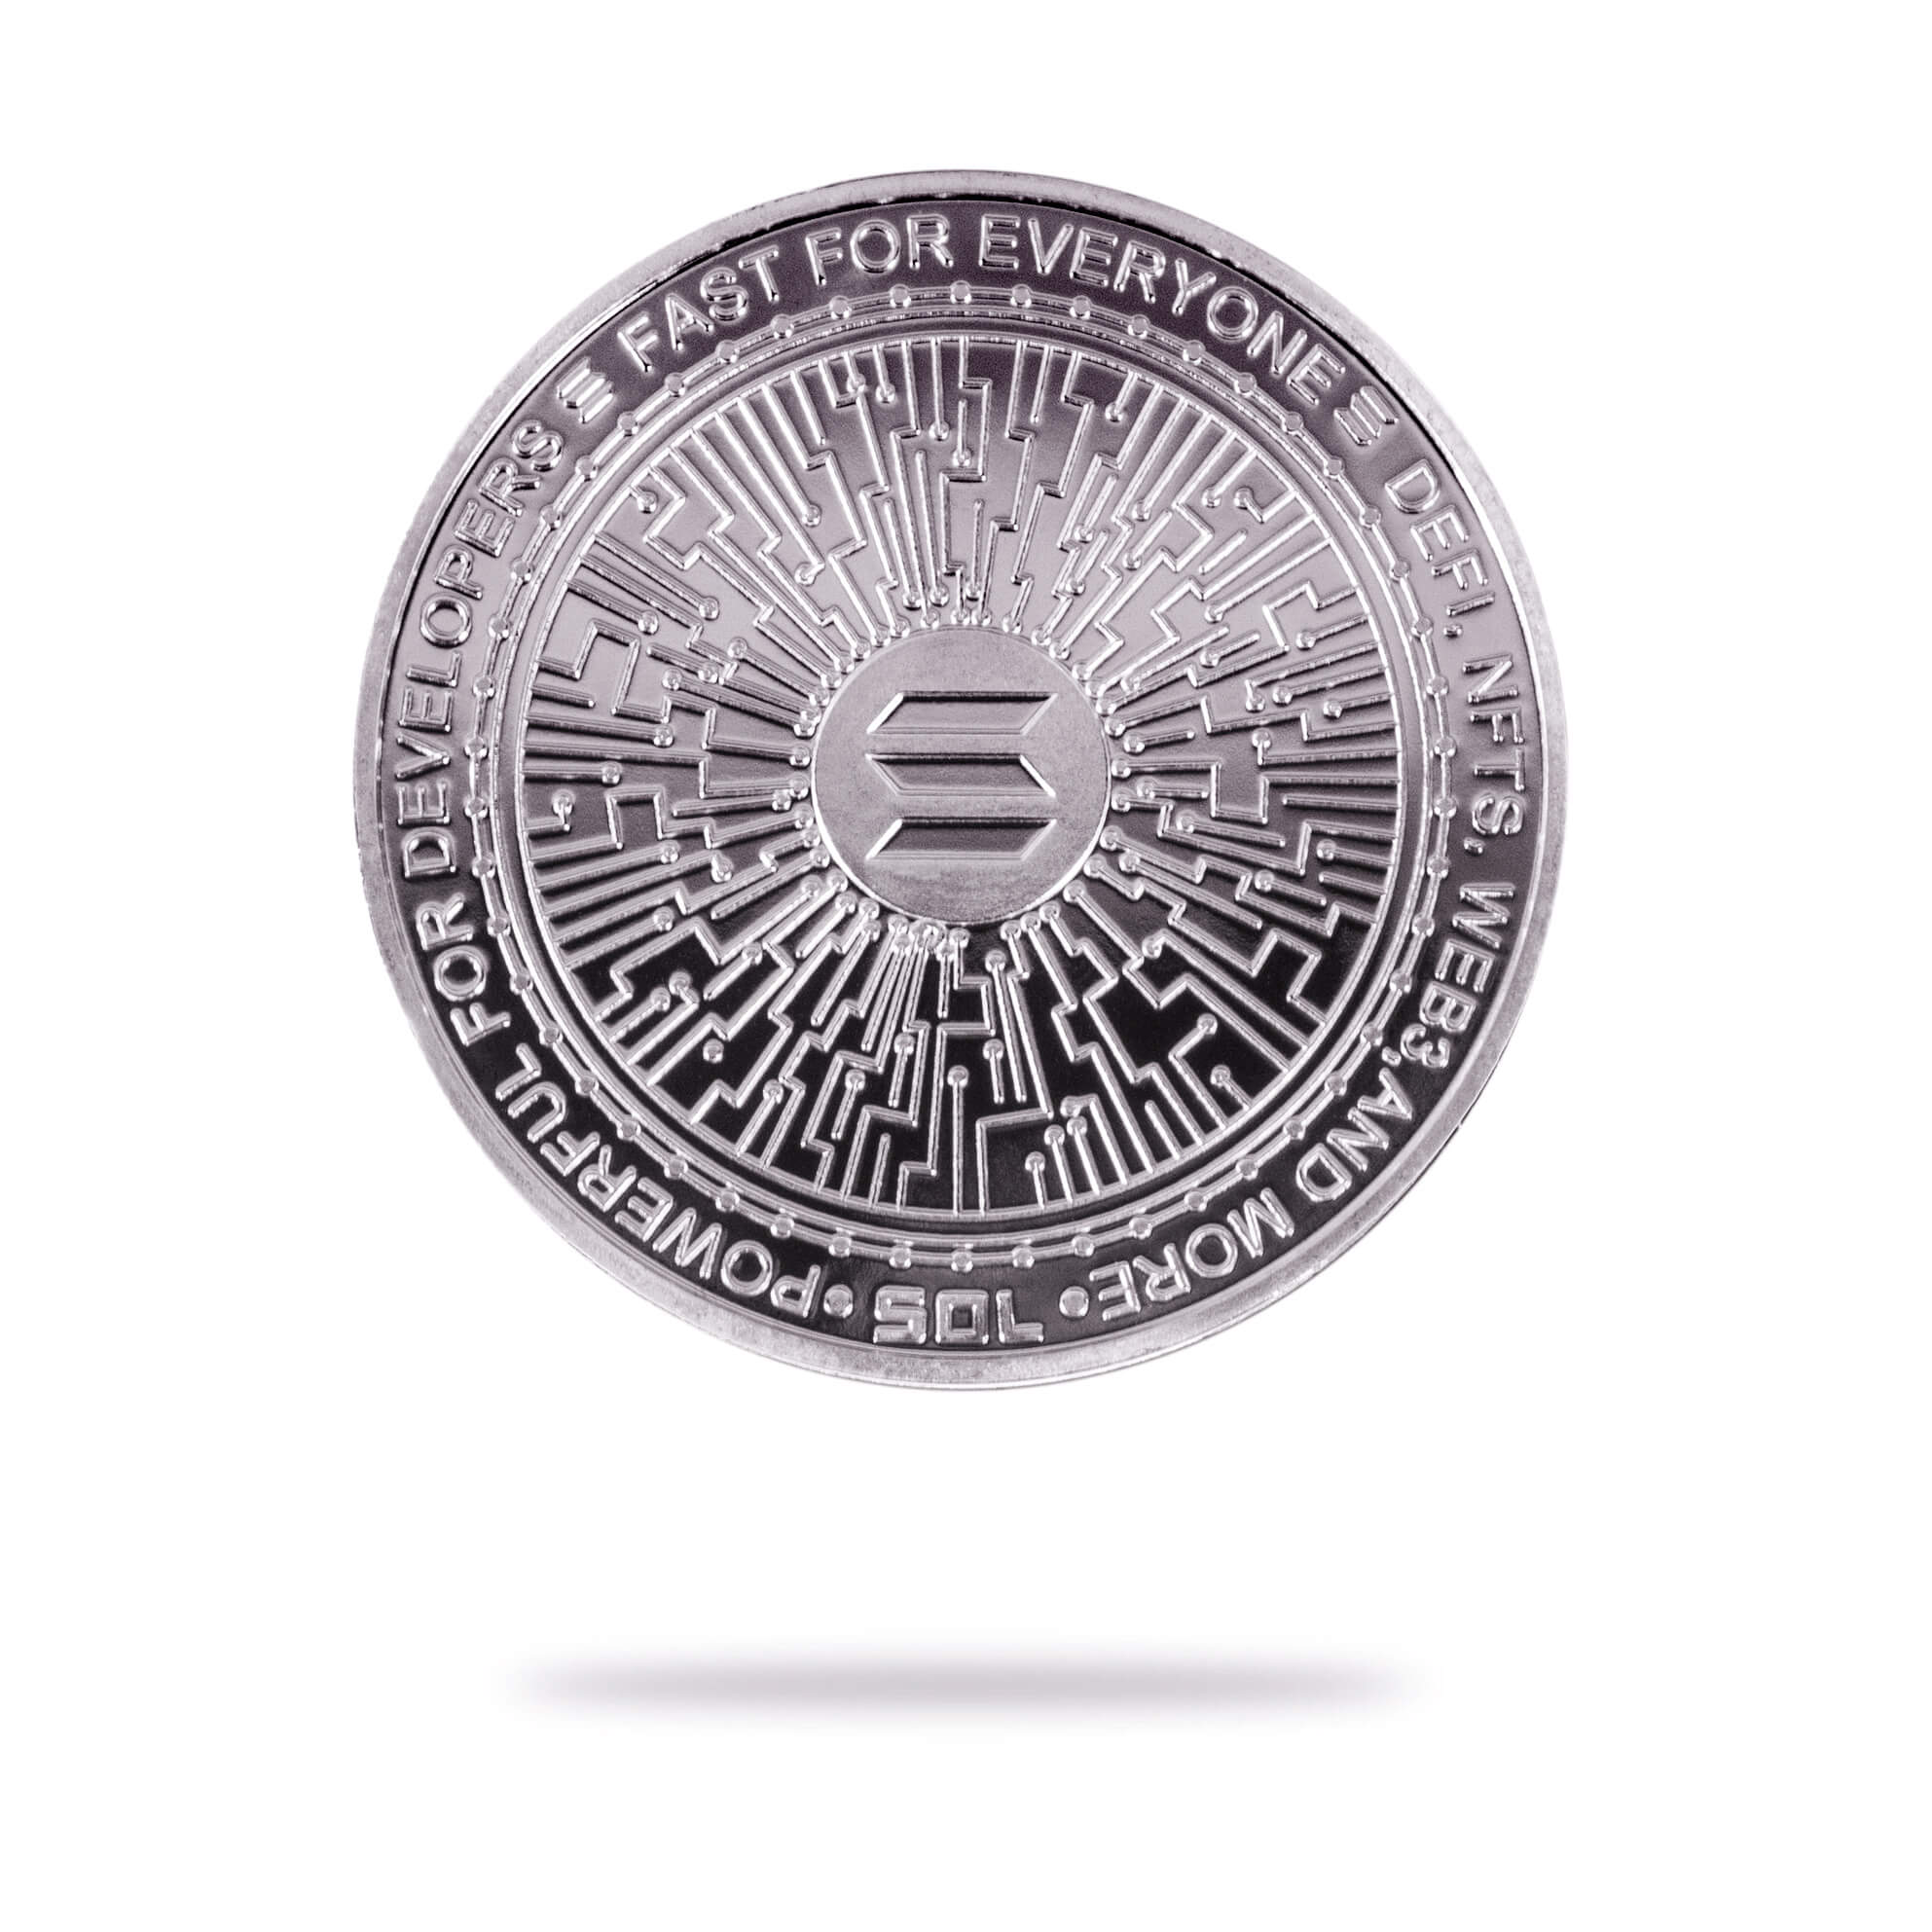 Cryptochips | Solana Physical Crypto Coin. Collectable cryptocurrency merch you can hodl